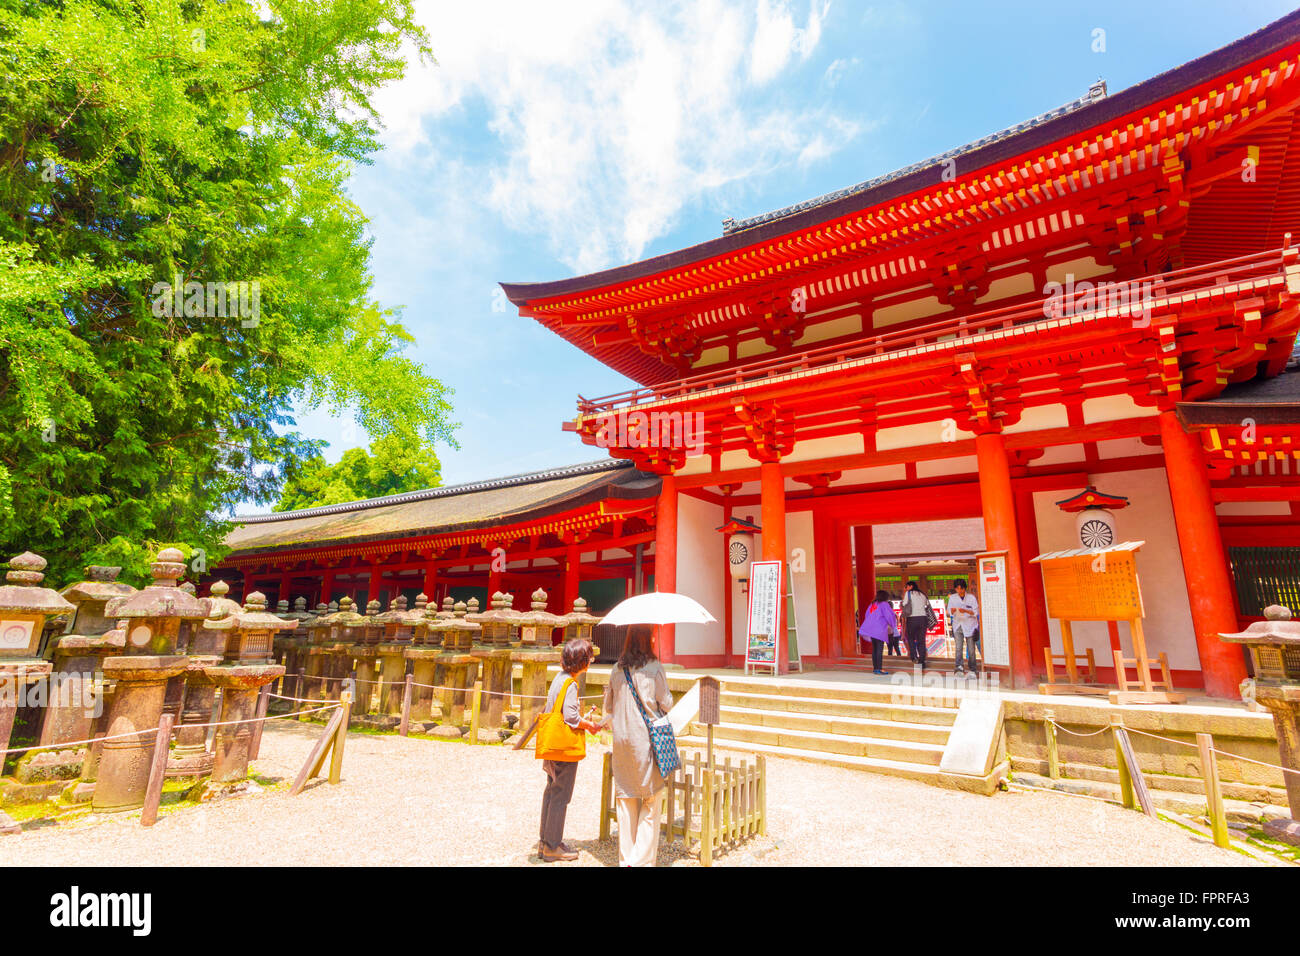 Japanese people at front red gate entrance to Kasuga-Taisha Shinto Shrine at the Todai-ji temple complex on a blue sky day. Hori Stock Photo